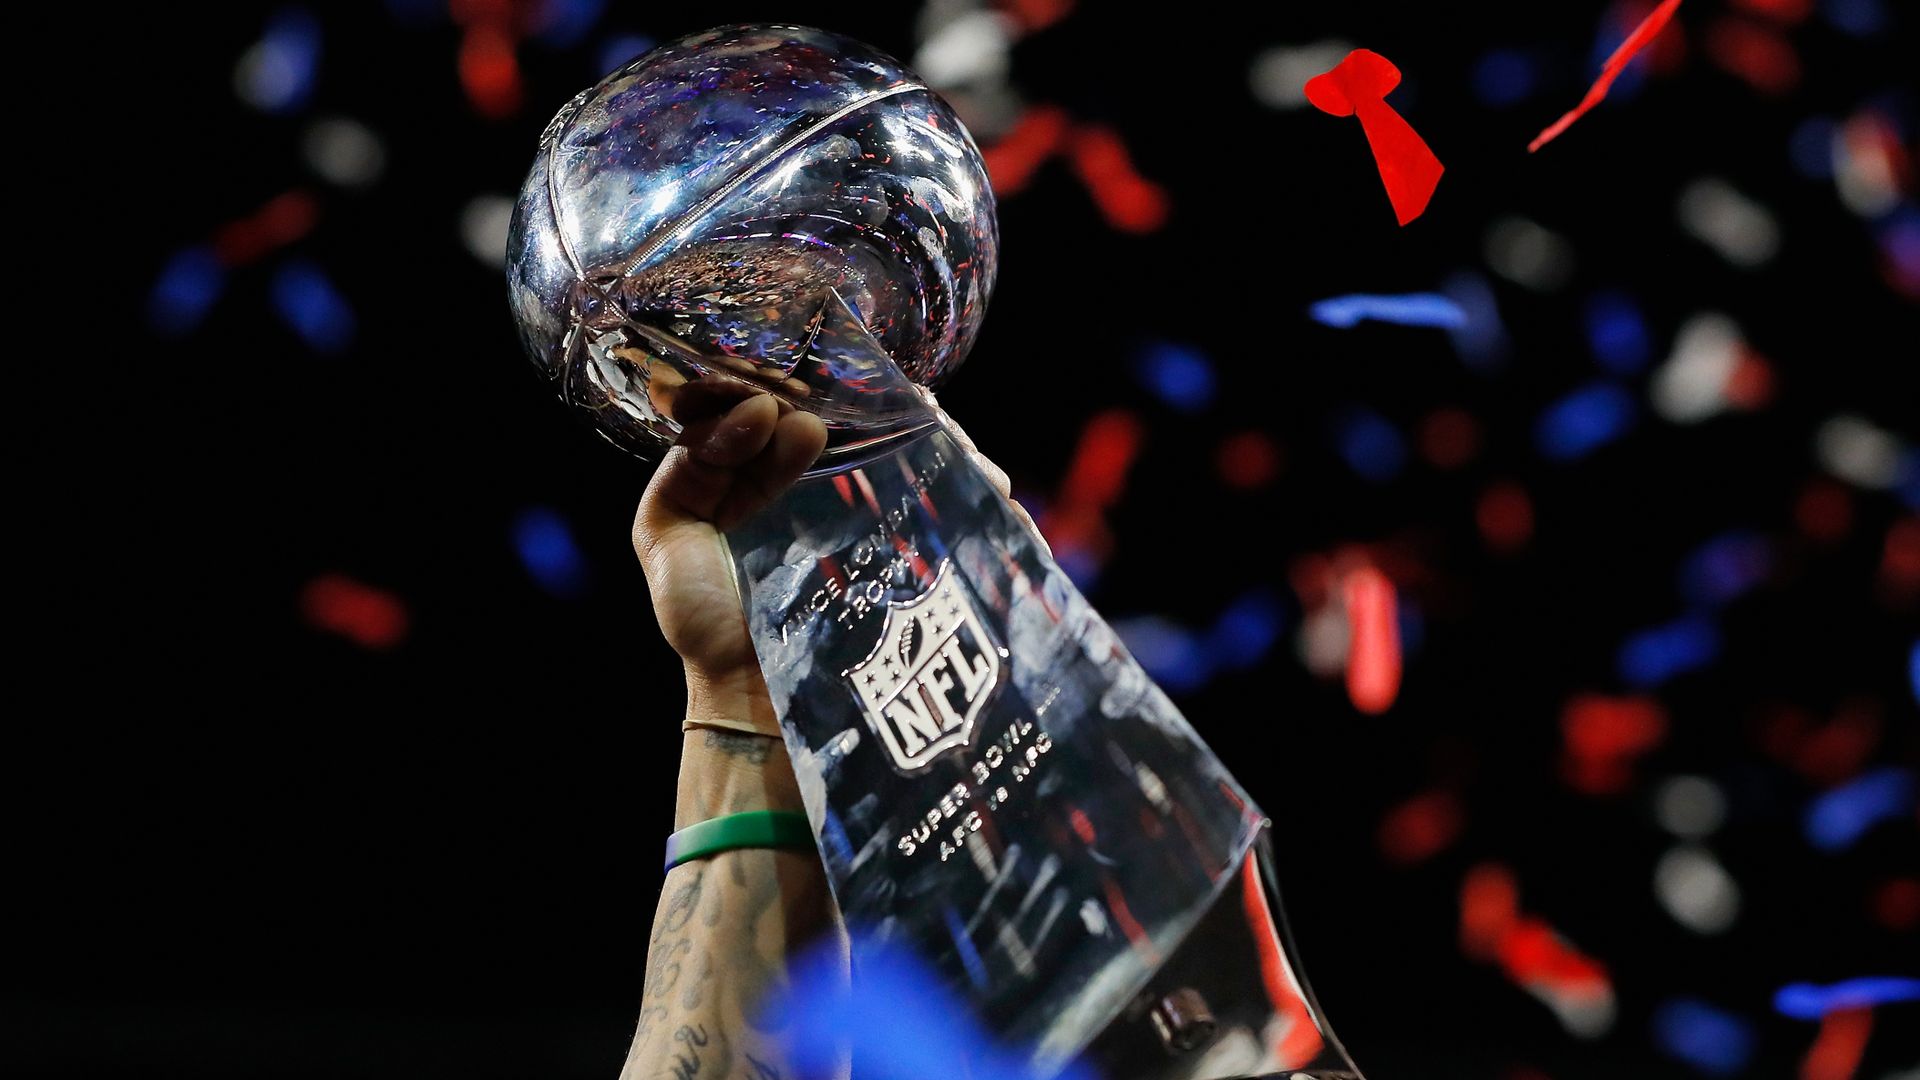 A detail of a New England Patriots player raising the Vince Lombardi Trophy after the Patriots defeat the Los Angeles Rams 13-3 during Super Bowl LIII at Mercedes-Benz Stadium on February 3, 2019 in Atlanta, Georgia.